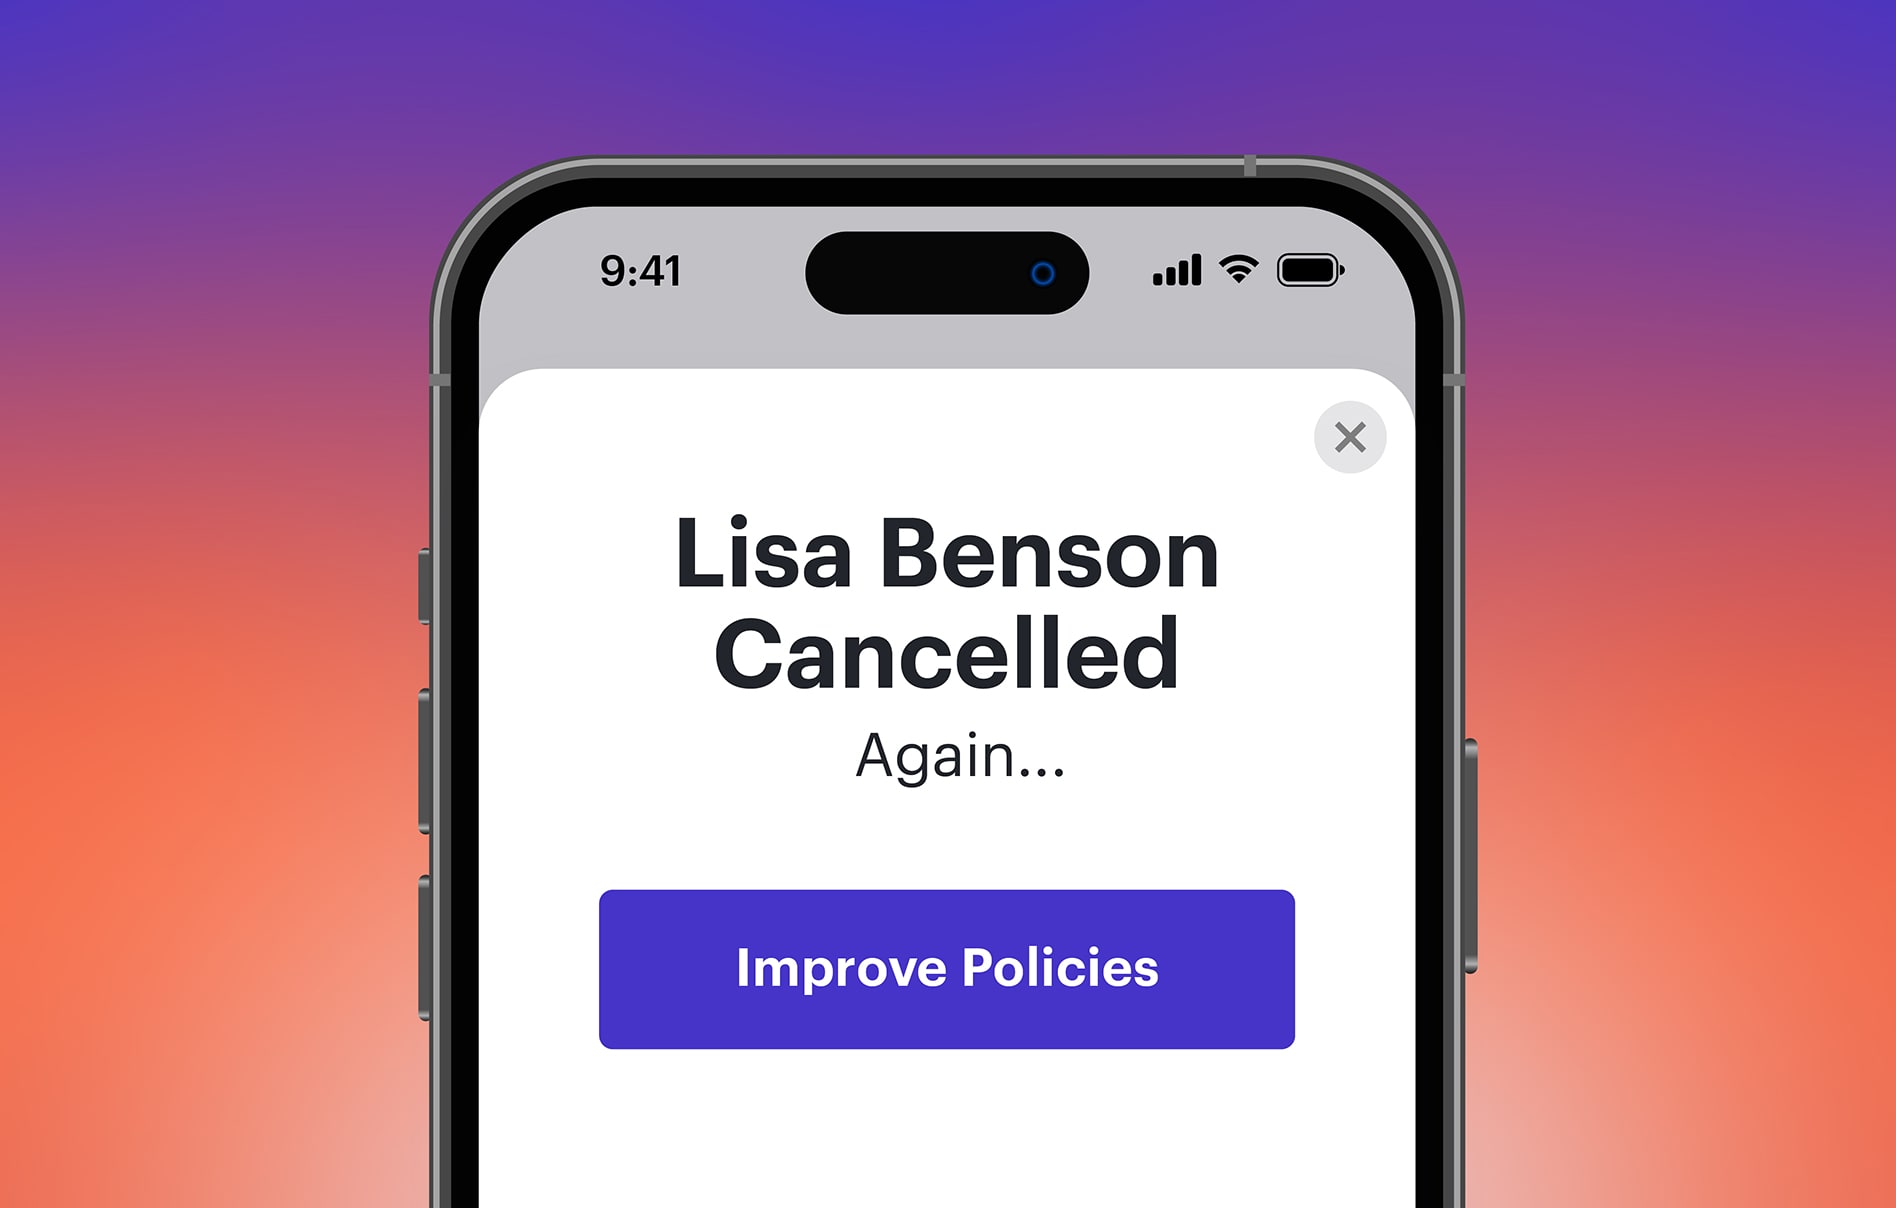 Phone display text "Lisa Benson Cancelled Again..." and a button underneath to "Improve Policies"